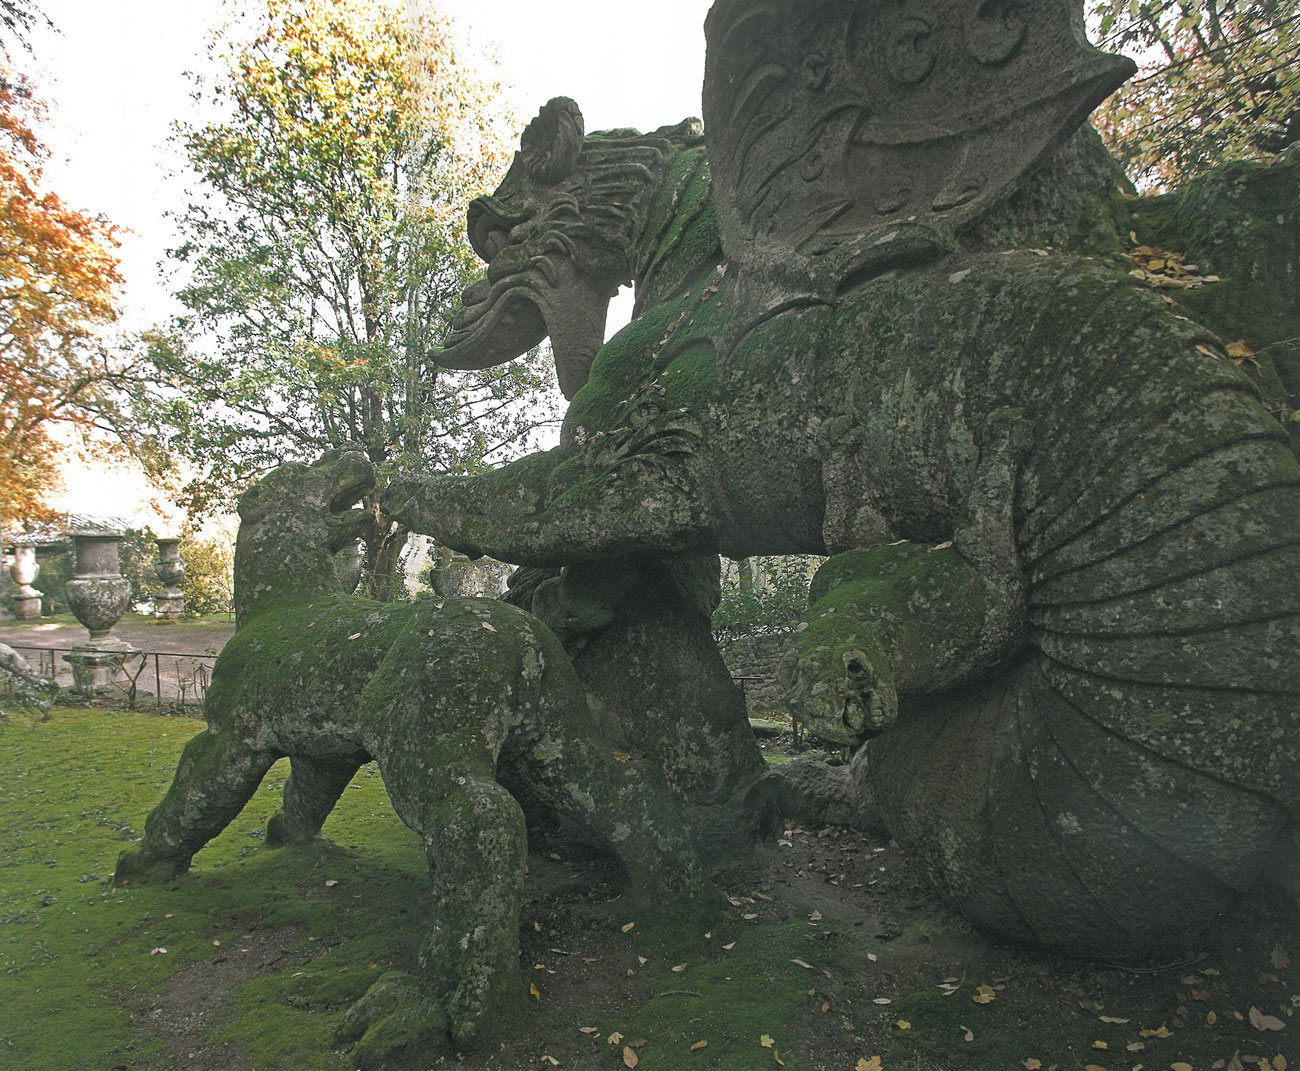 View of Dragon & Lions, with the Square of the Vases in the background. Image courtesy of THE GARDEN AT BOMARZO, by Jessie Sheeler.